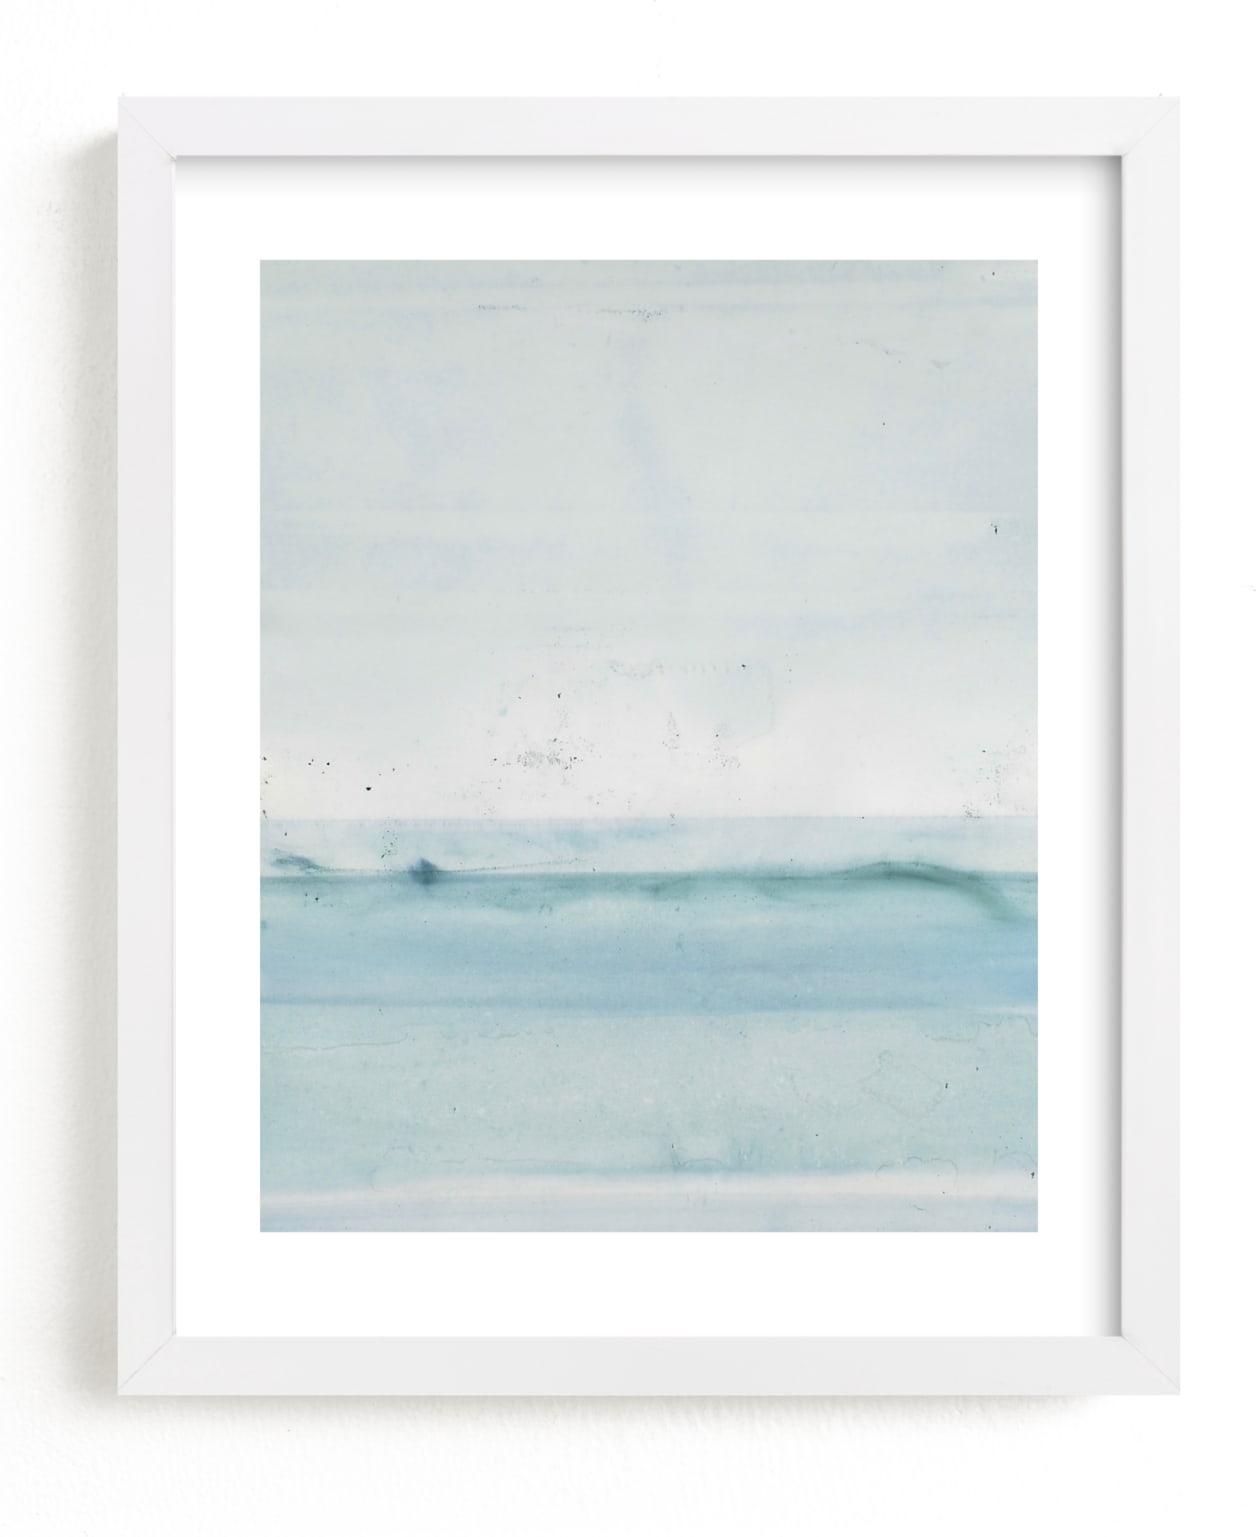 This is a blue nursery wall art by Ashleigh Ninos called Forecast no. 46.